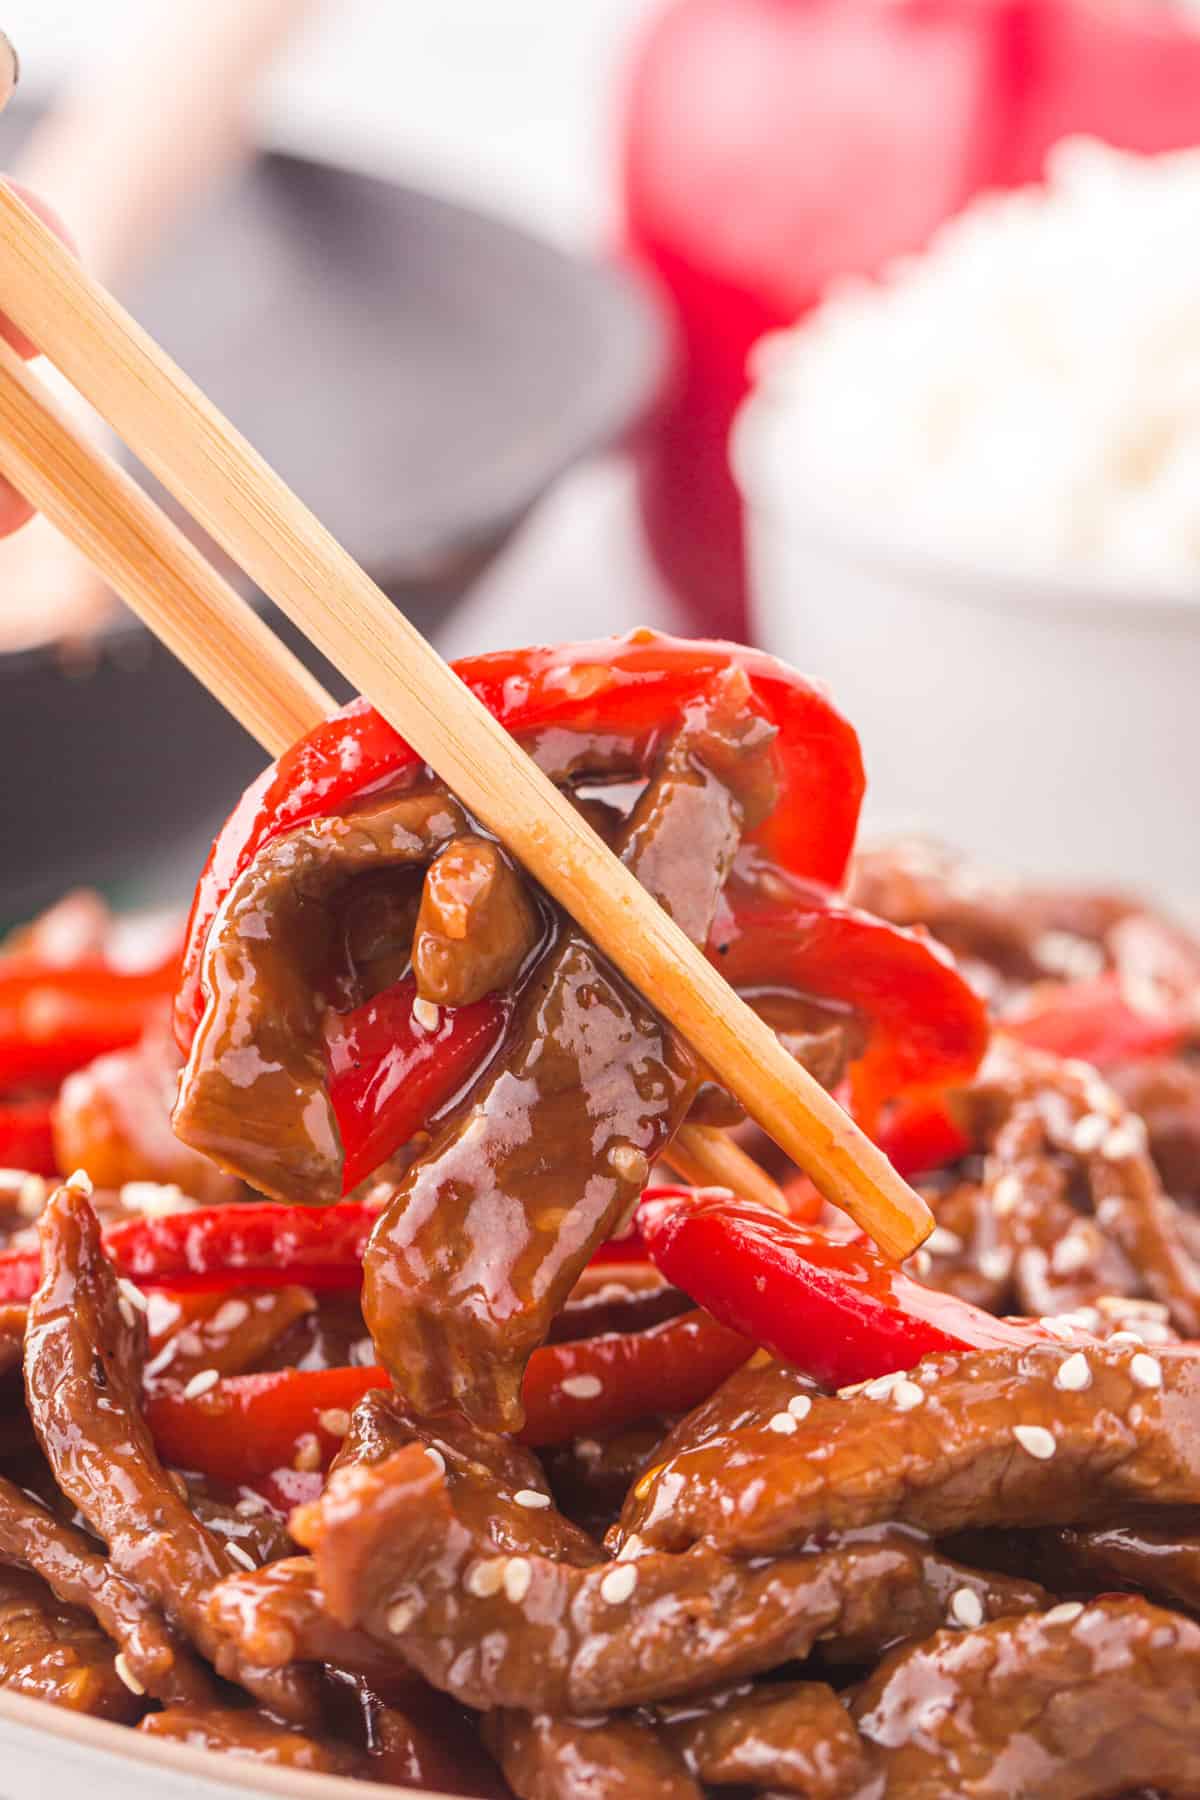 Chopsticks are lifting a bite of peppers and beef from a plate.